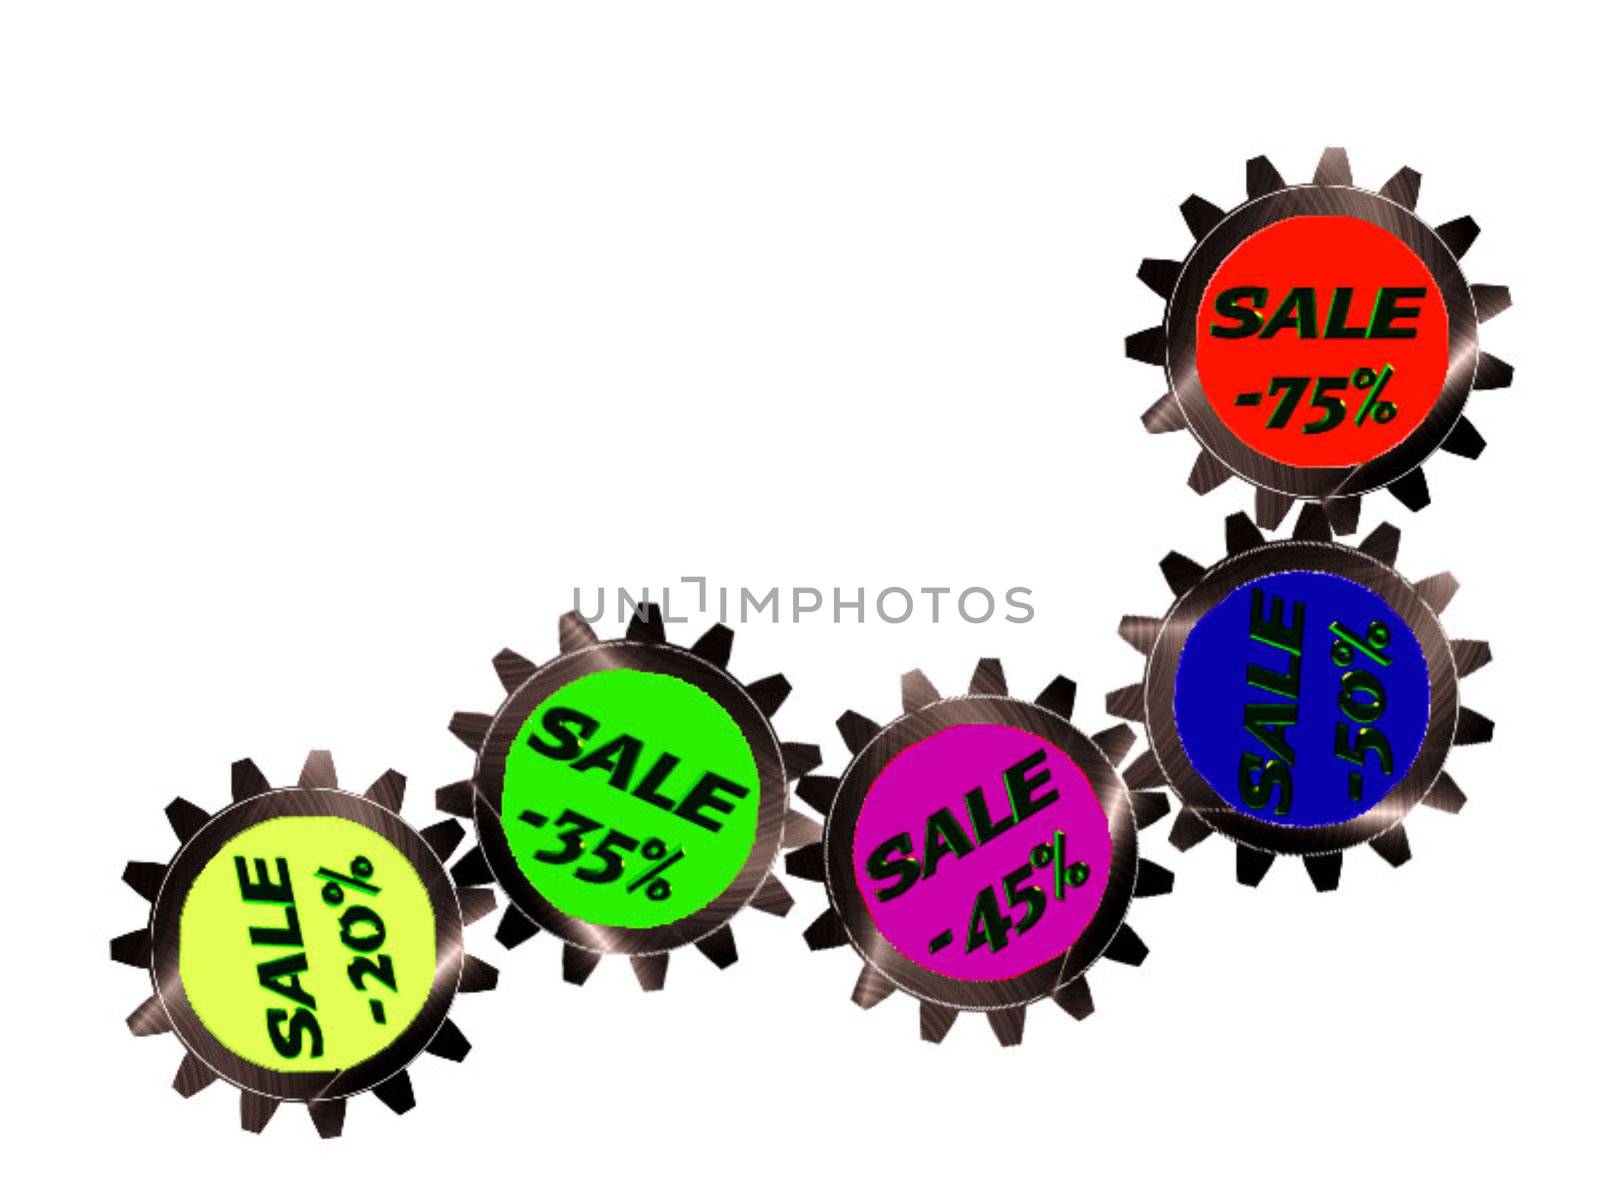 Crazy Sale Advertisement background with great discount,
anything numbered six winding discount